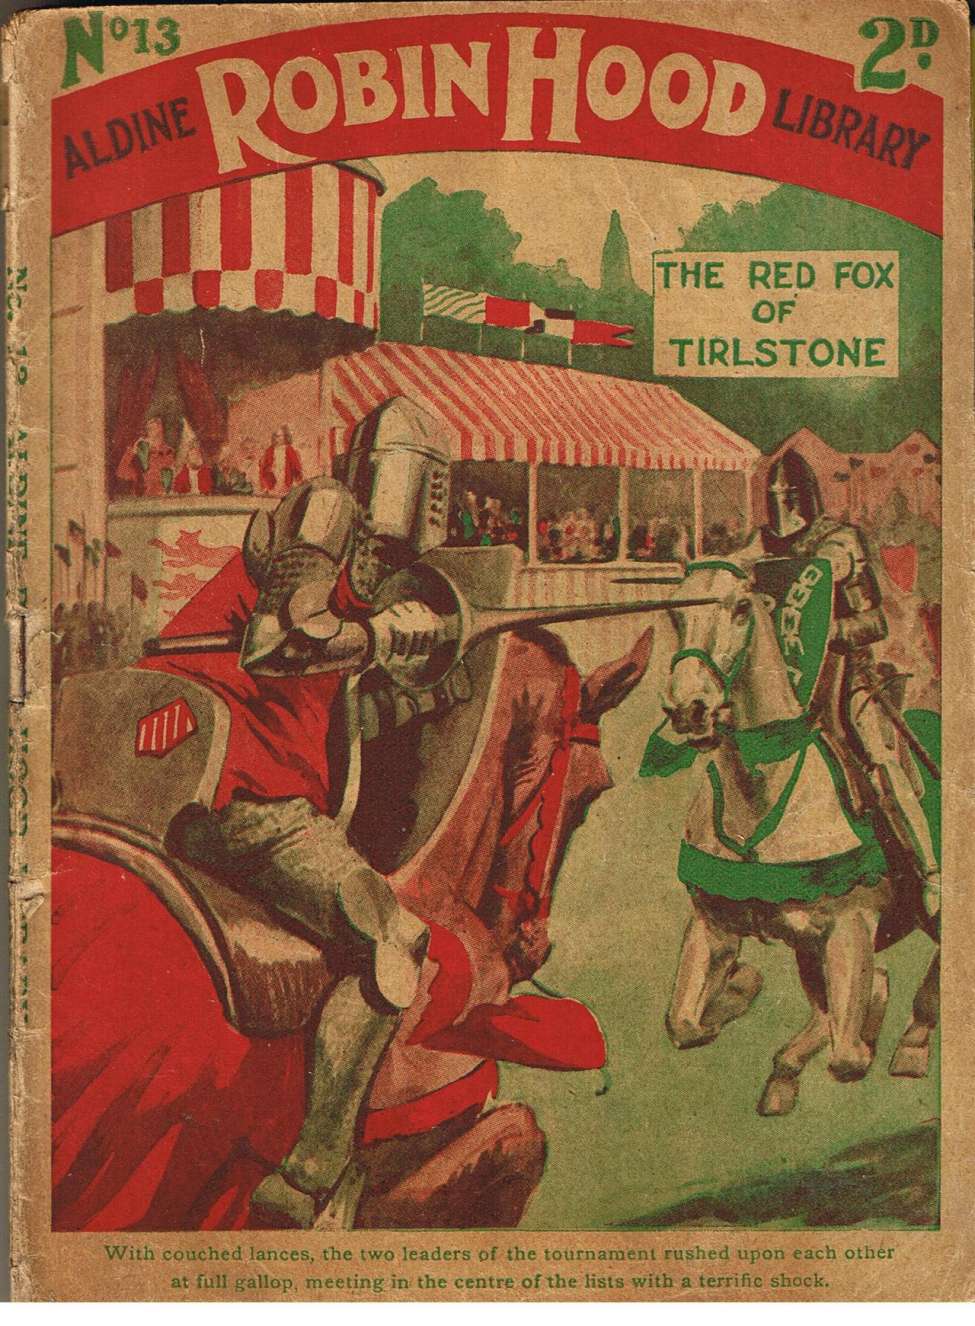 Book Cover For Aldine Robin Hood Library 13 - The Red Fox of Tirlstone